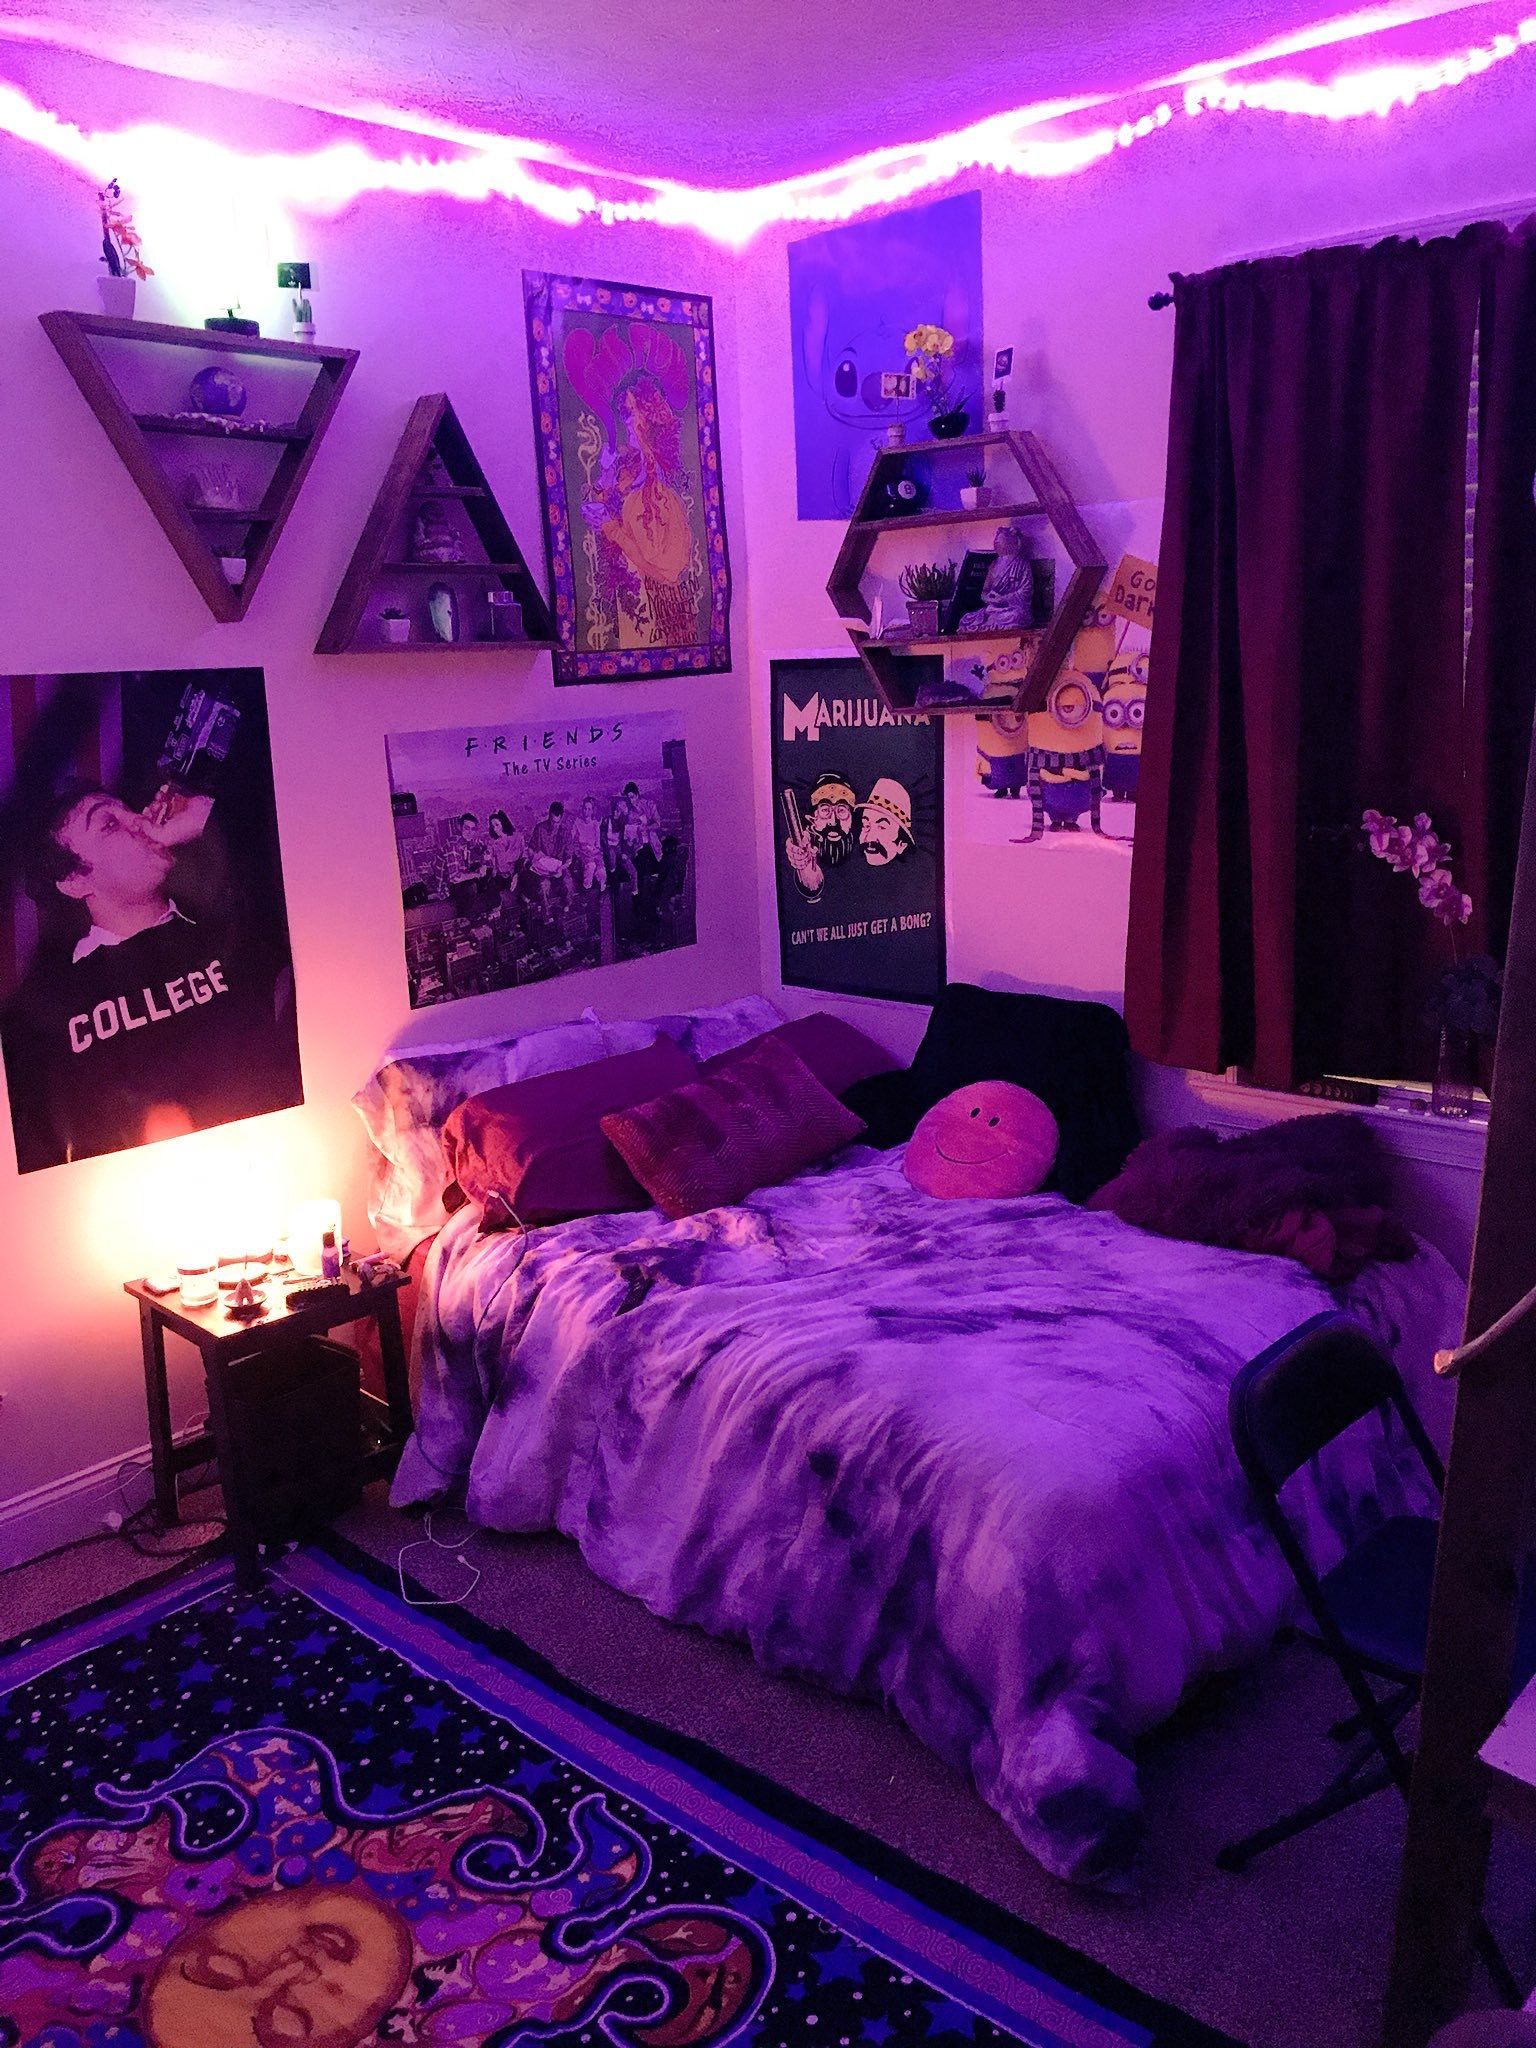 Hipster college apartment, perfect to vibe! -   22 hipster dorm decor
 ideas